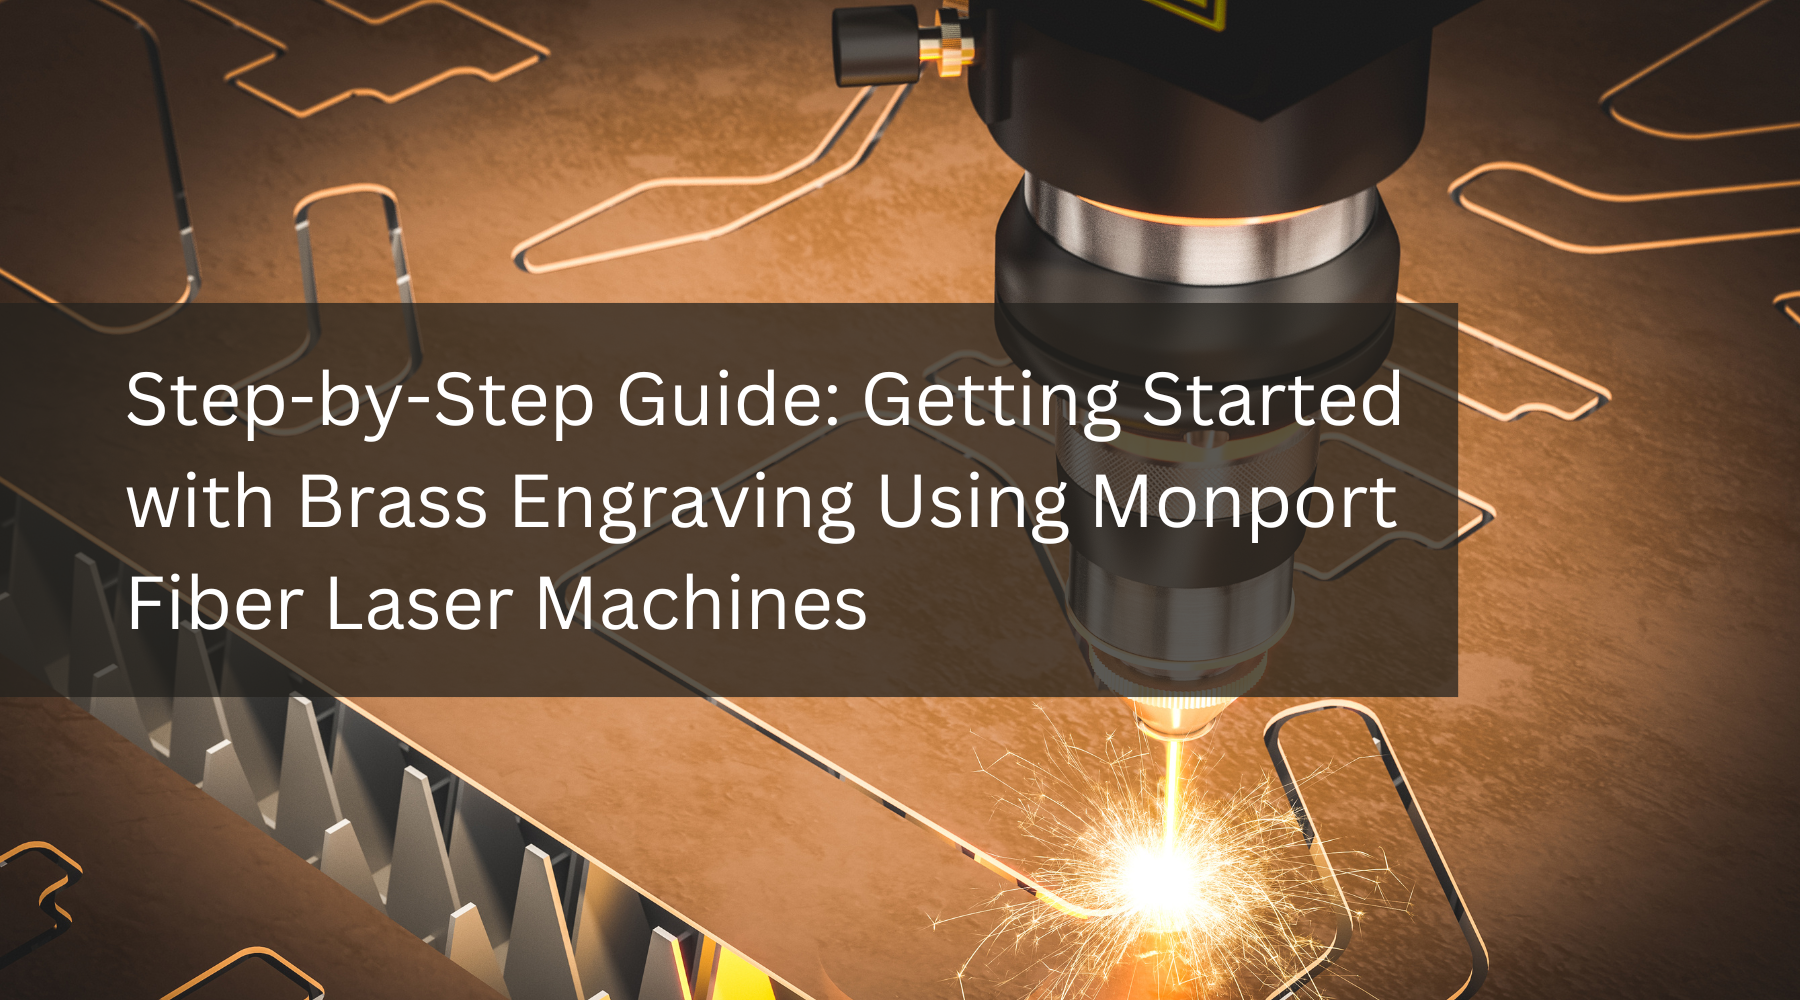 Step-by-Step Guide: Getting Started with Brass Engraving Using Monport Fiber Laser Machines